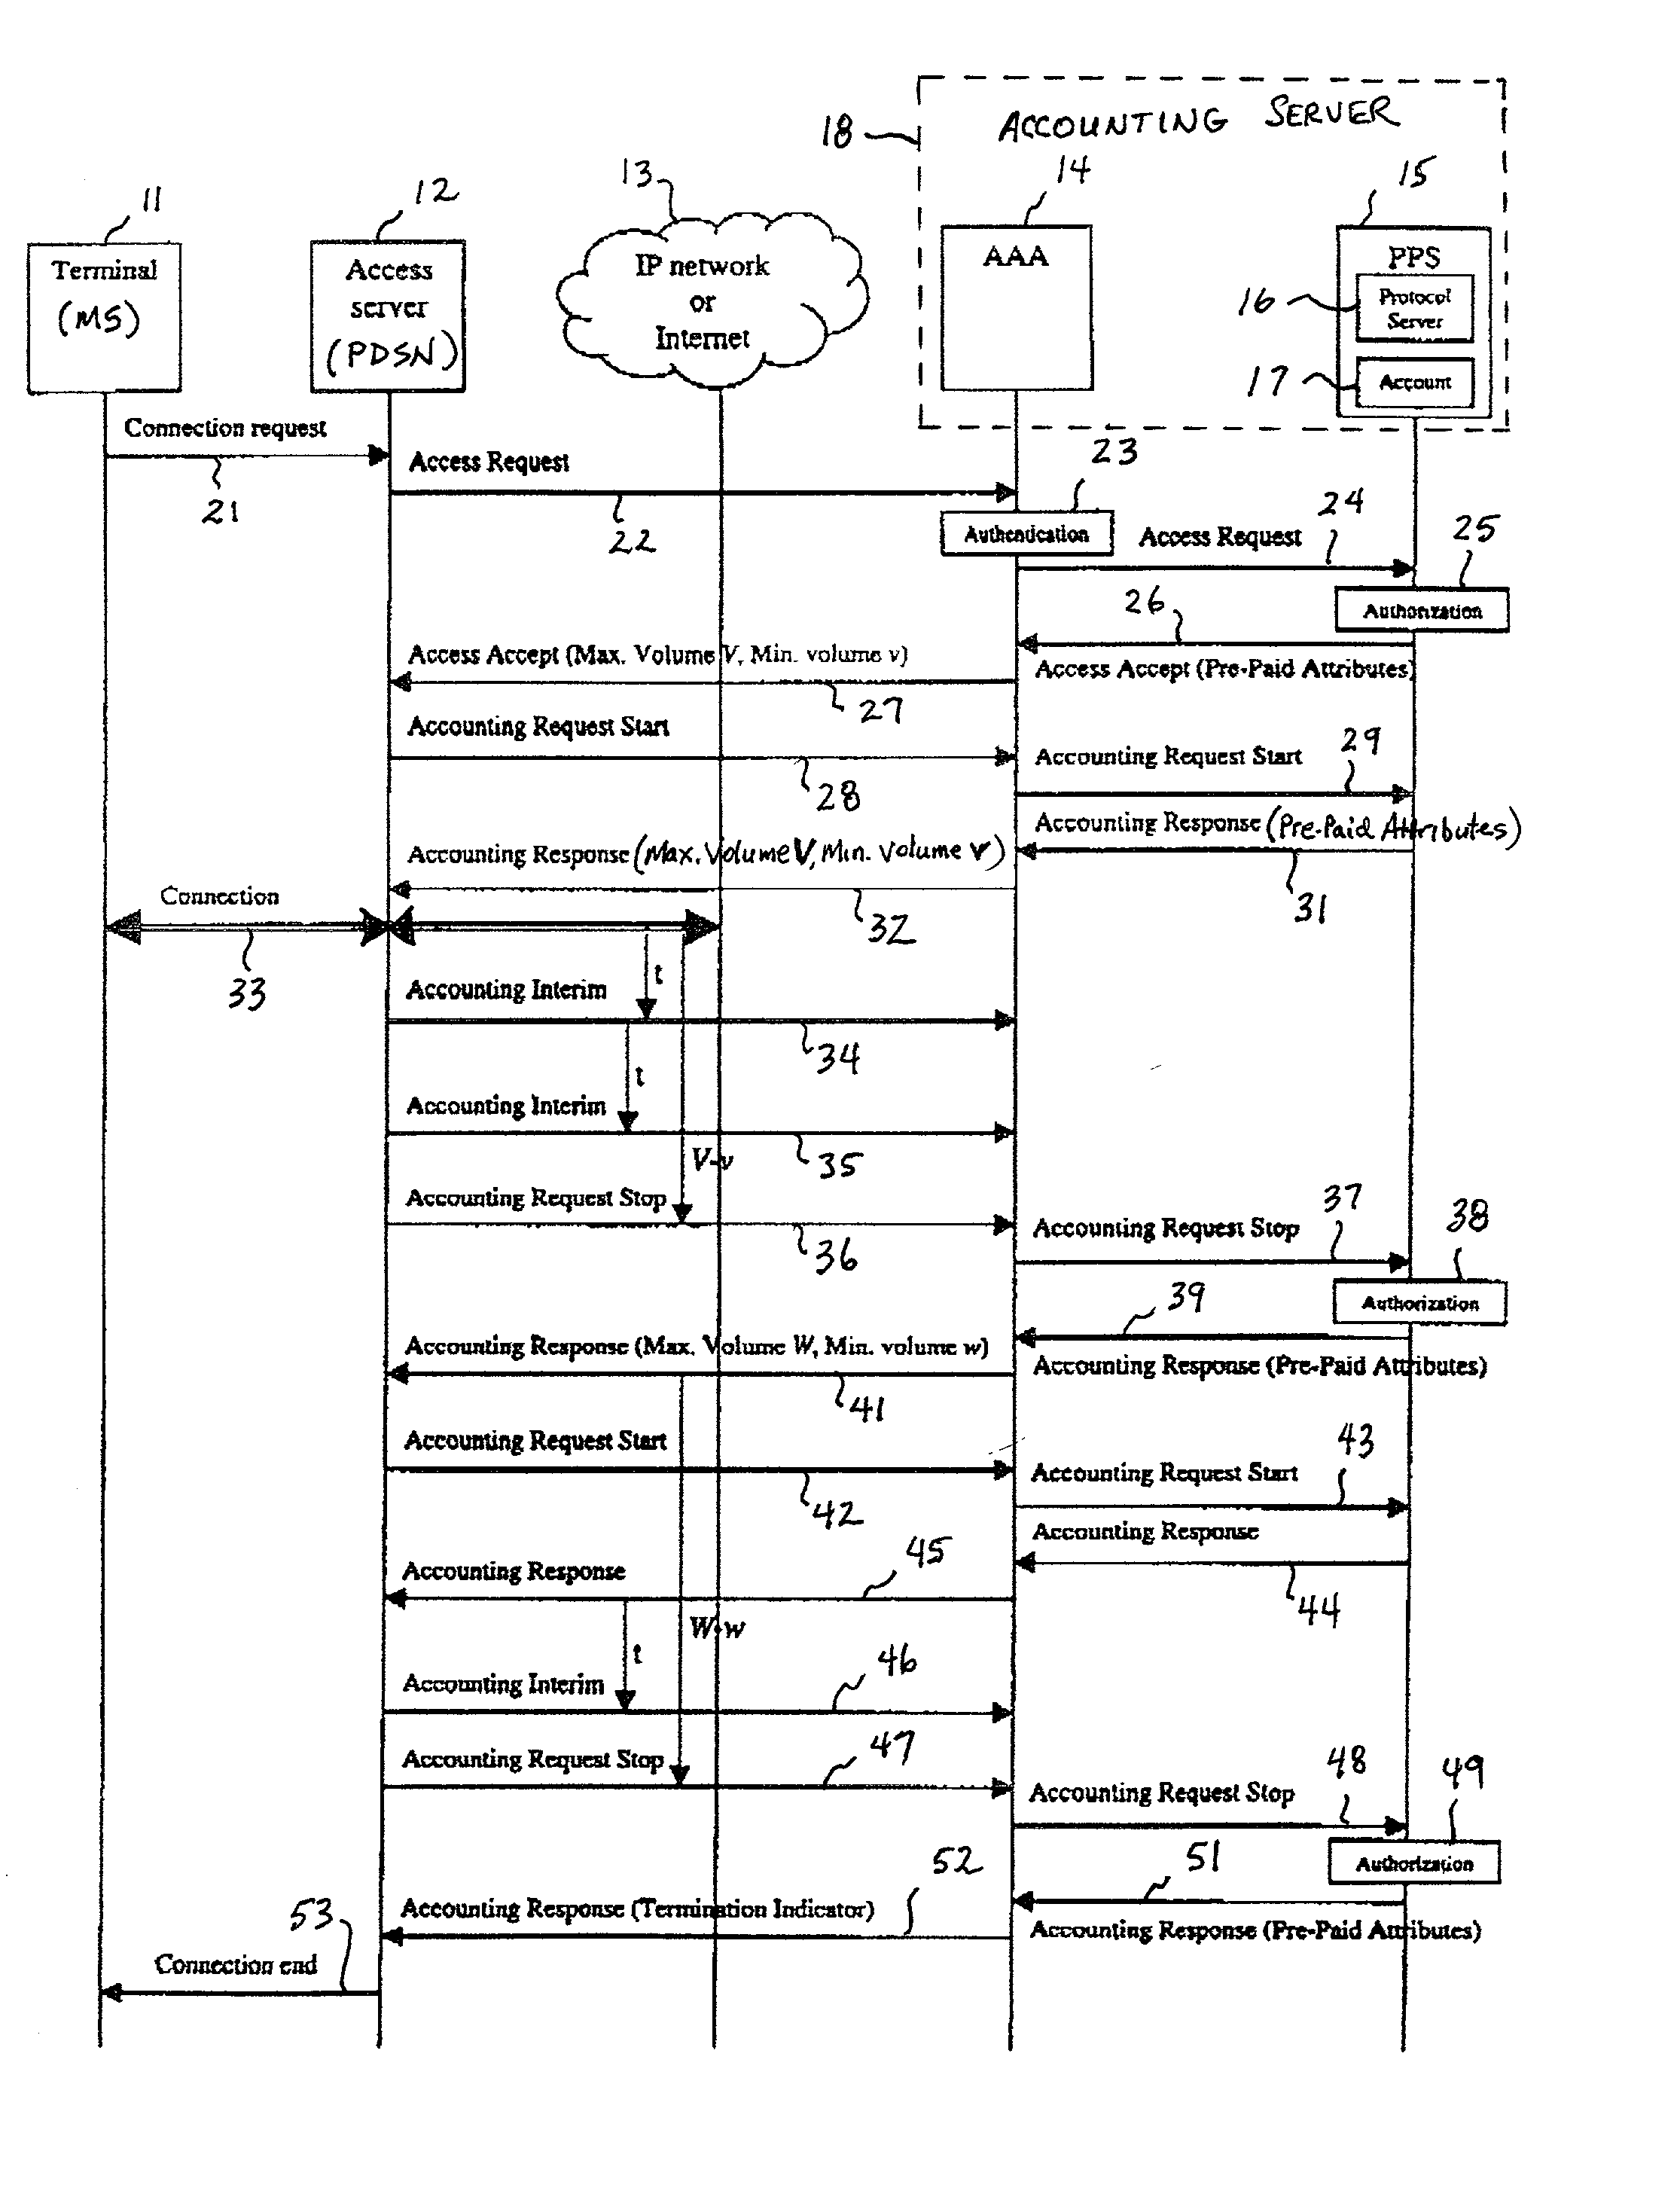 System and method of monitoring and reporting accounting data based on volume